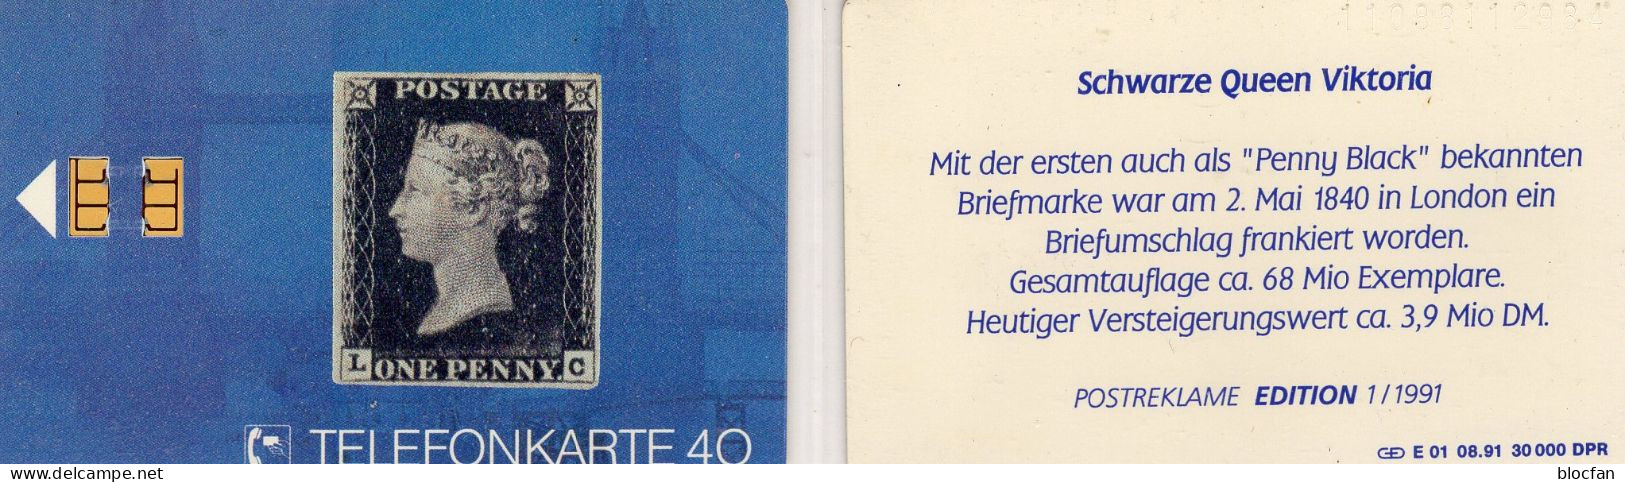 Penny Black 1840 TK E01/1991 30.000 Expl.** 25€ Edition 1 Schwarze Queen Victoria  TC History Stamp On Phonecard Germany - E-Series : Edition - D. Postreklame